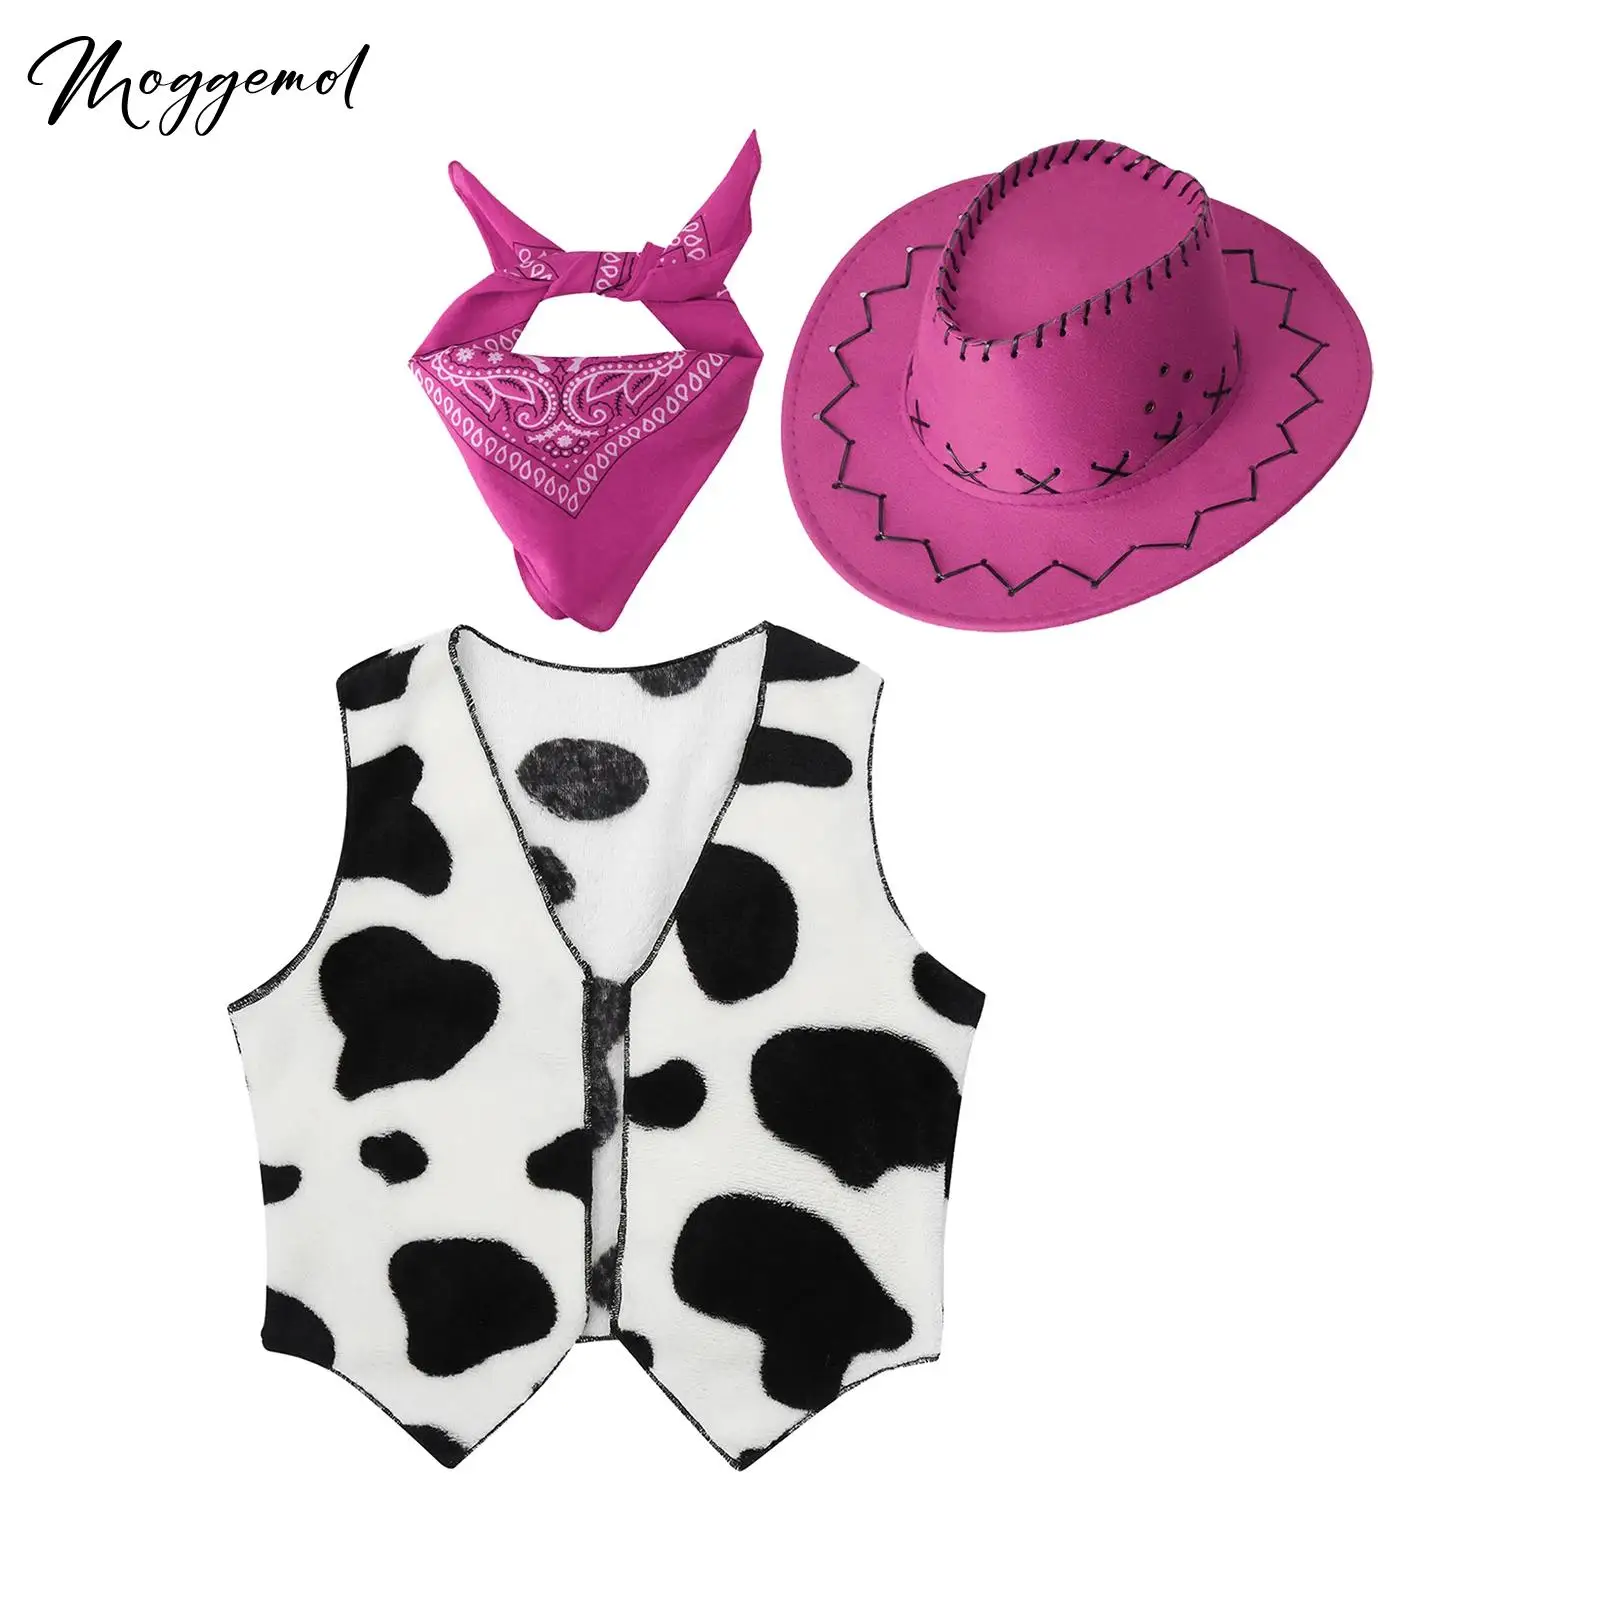 3 Pcs Kids Western Rodeo Cowboy Cowgirl Costume Vest with Bandanna Hat Wild West Outfits for Halloween Party Cosplay Dress Up